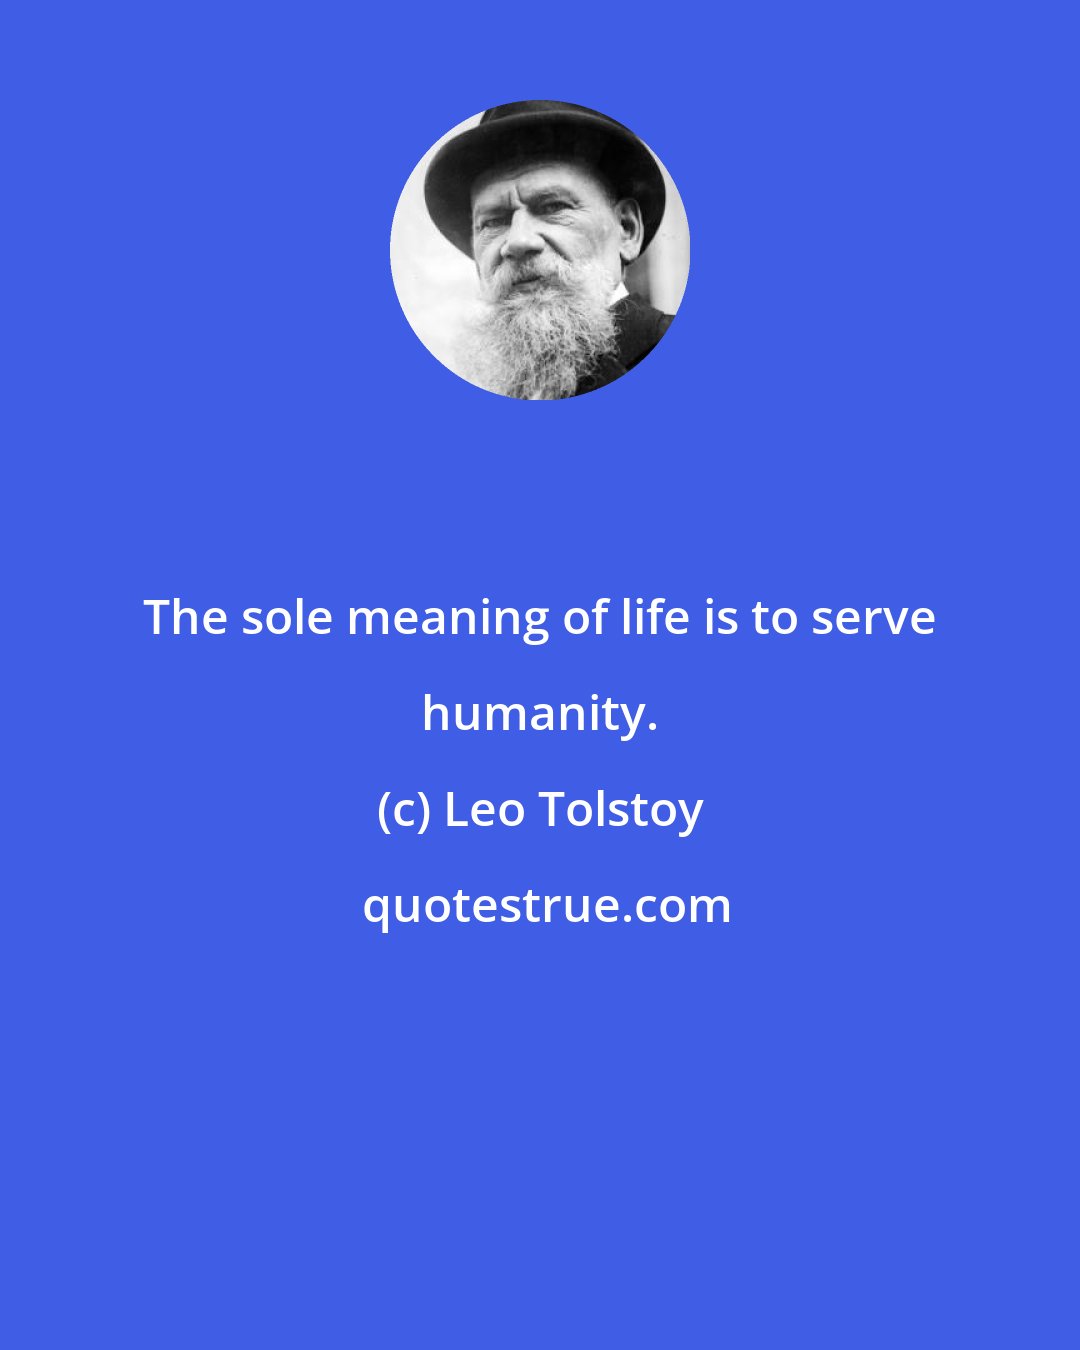 Leo Tolstoy: The sole meaning of life is to serve humanity.